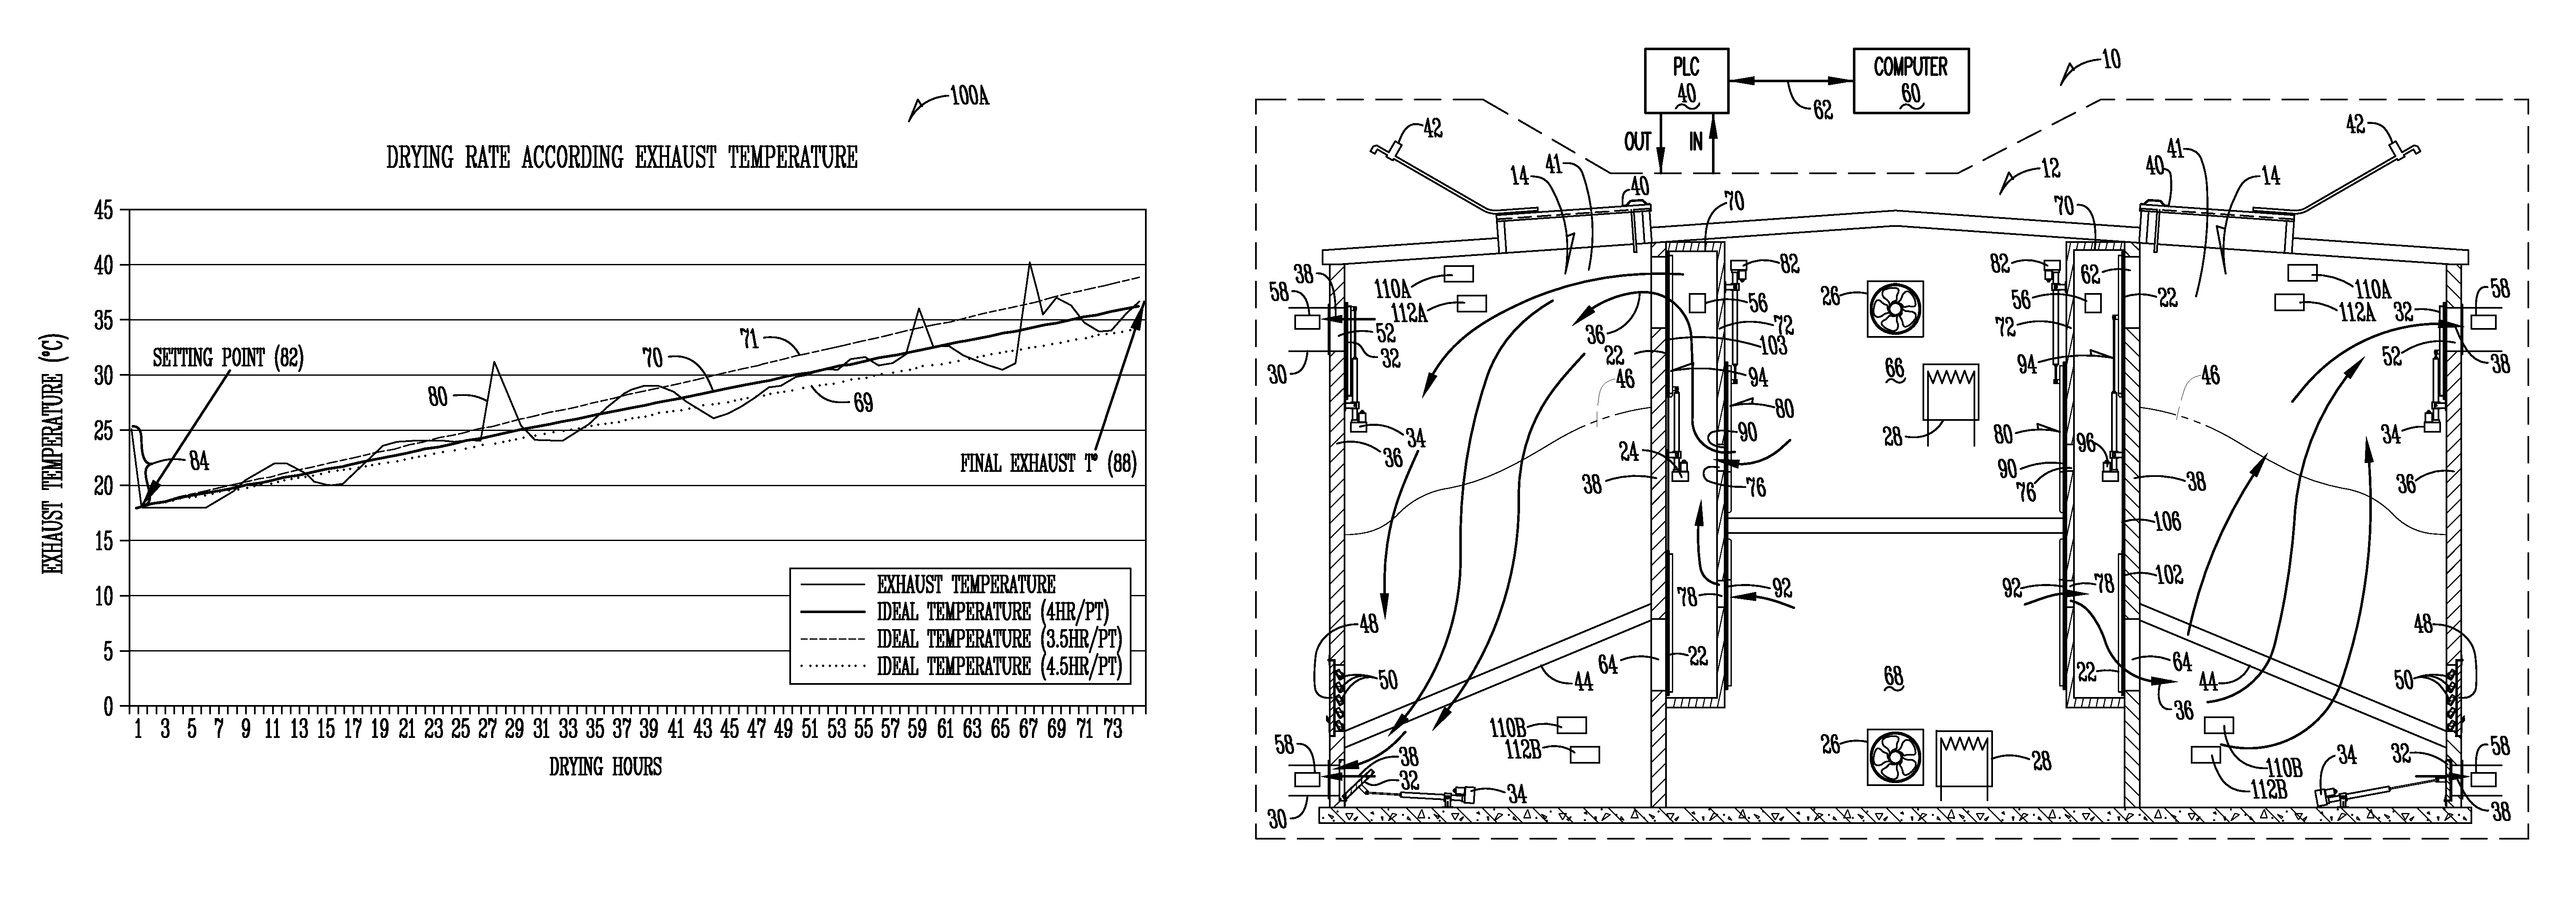 Method, apparatus and system for controlling heated air drying